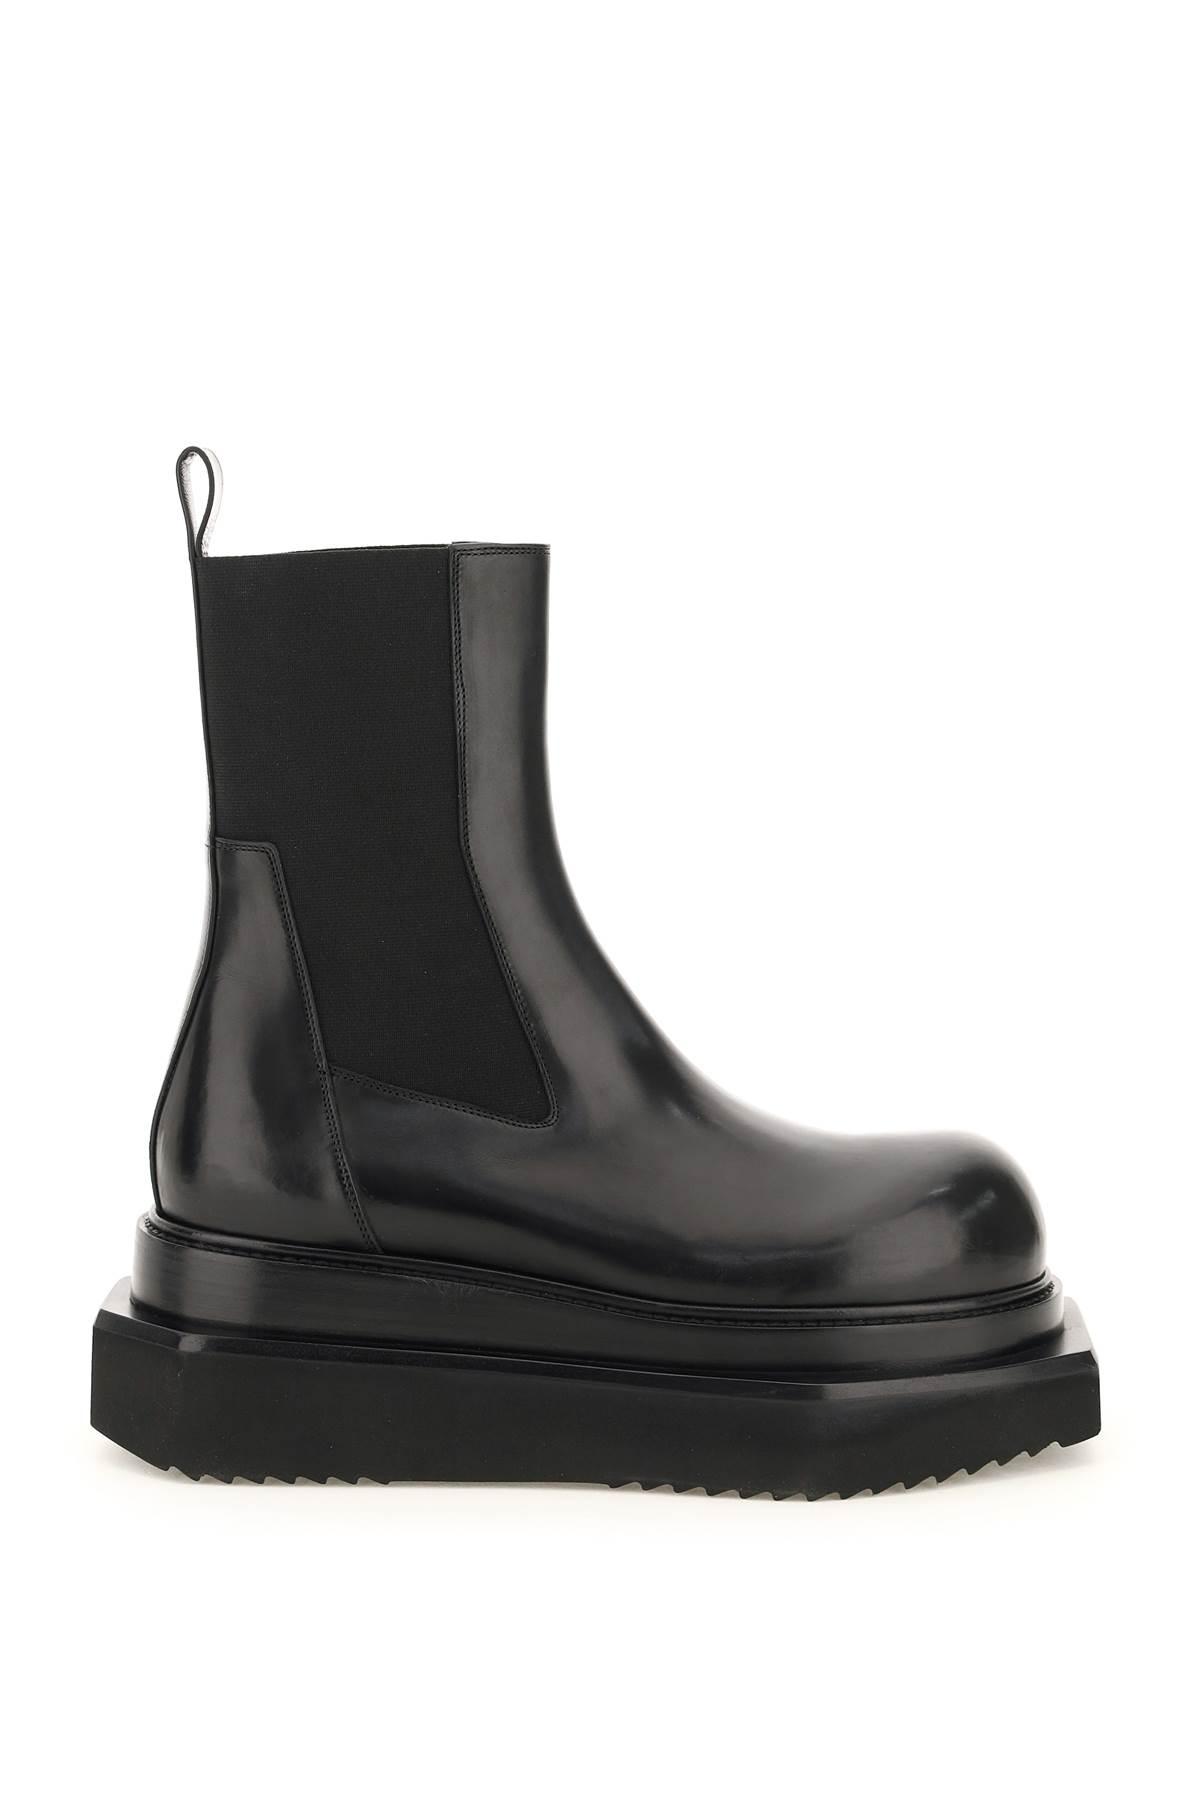 Rick Owens Leather Turbo Cyclops Beatle Boots in Black (Black 